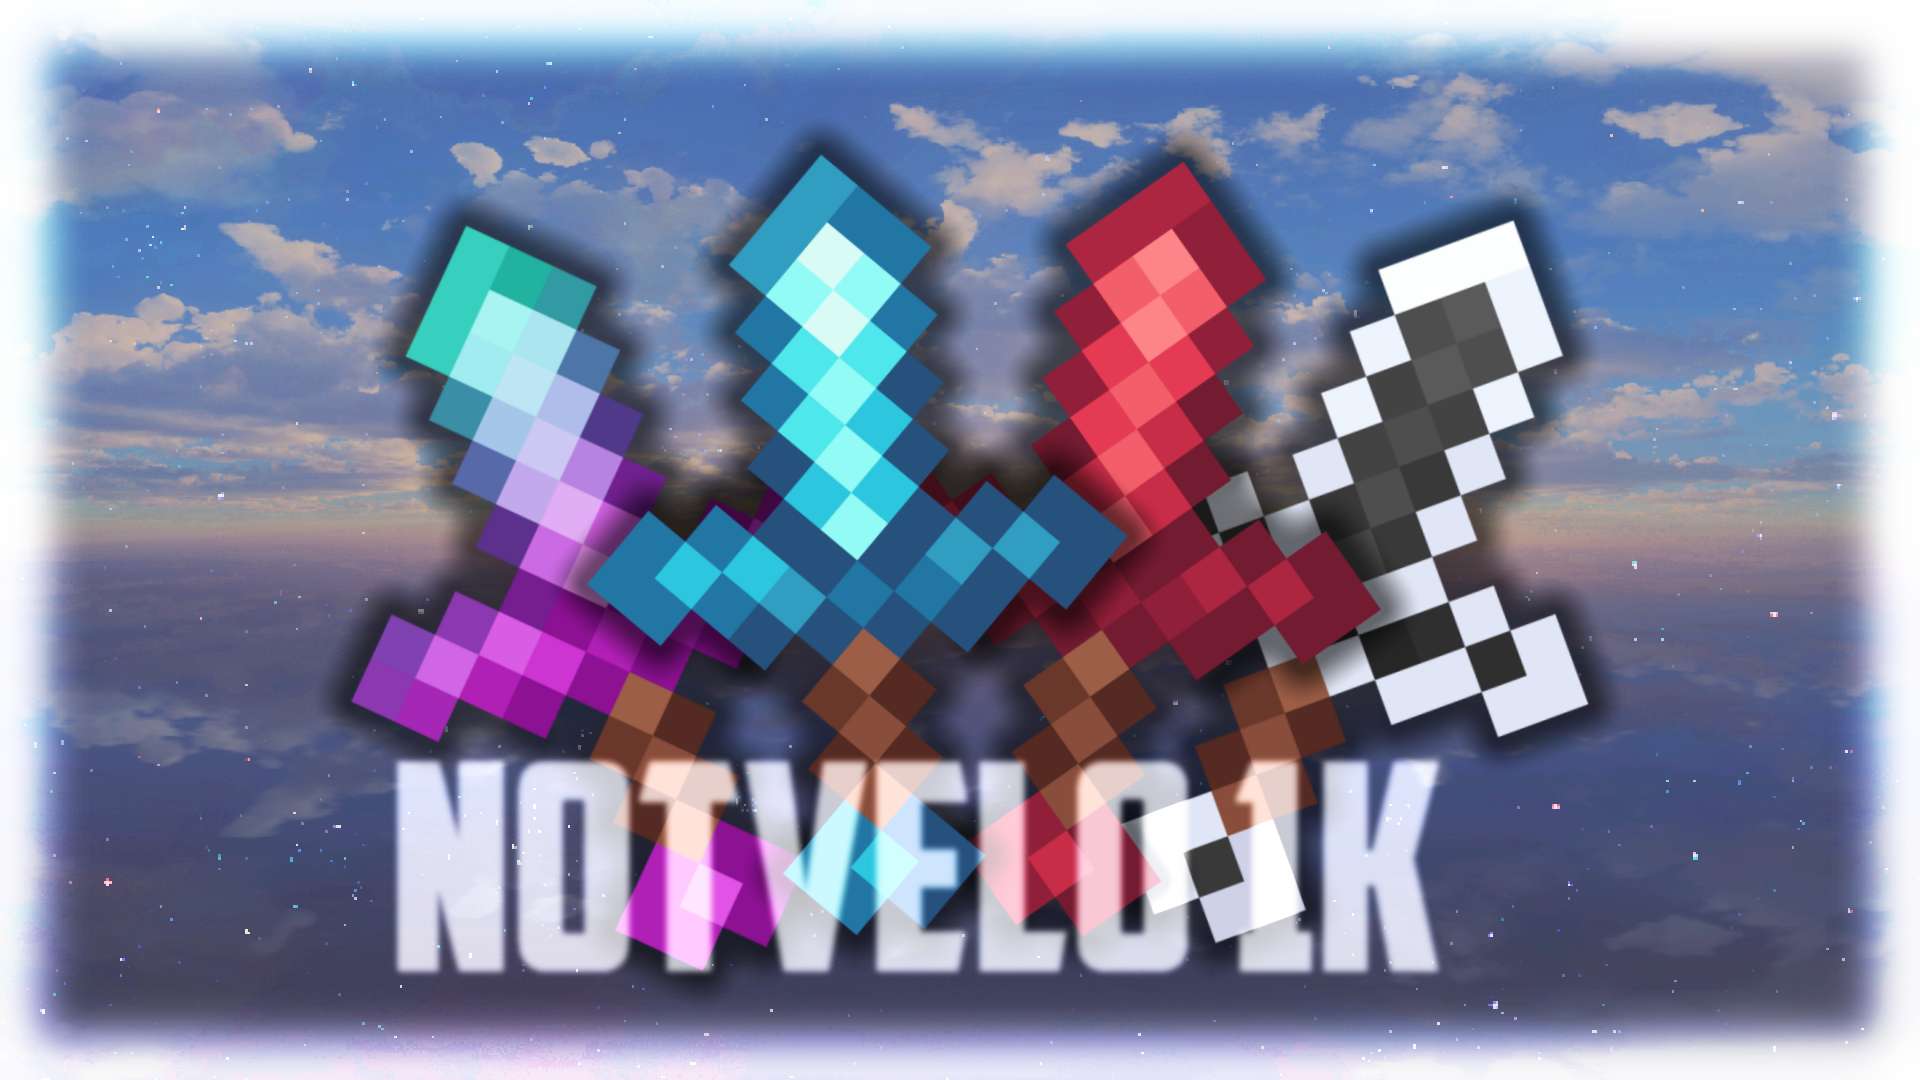 NotVelo 1k - Black and White 16x by Zlax on PvPRP